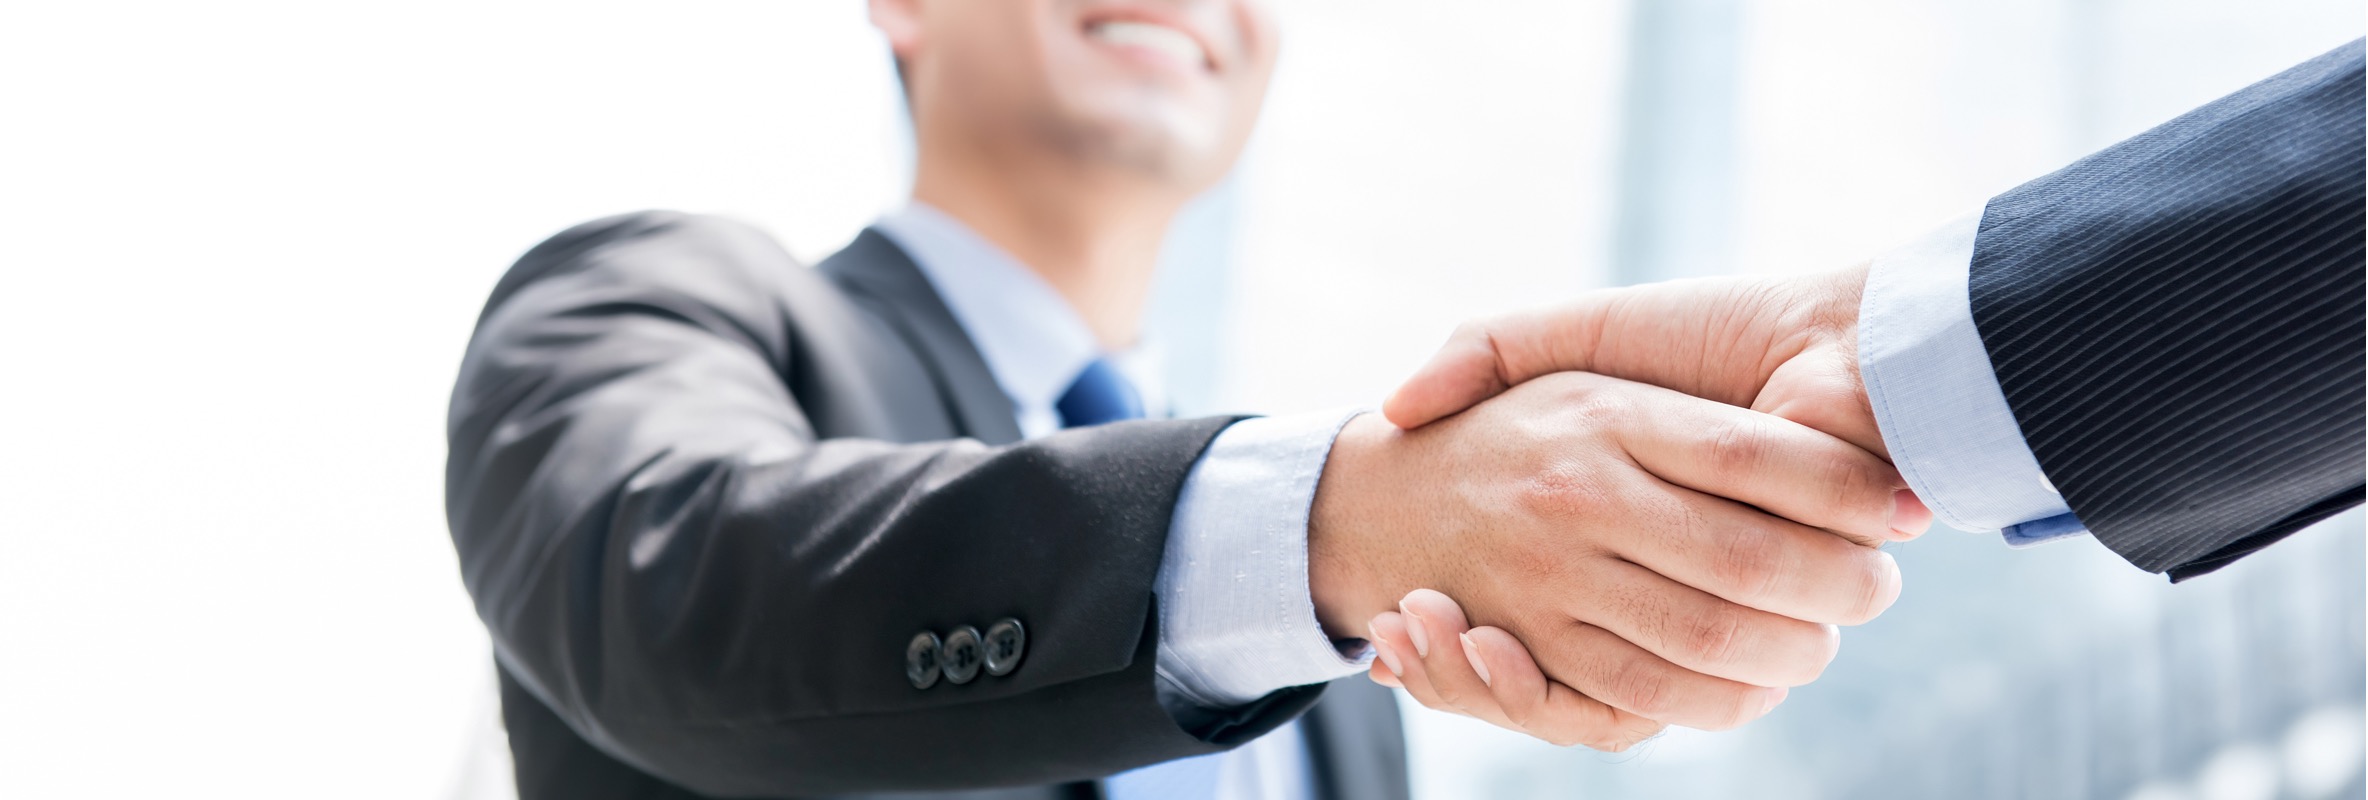 shaking hands business